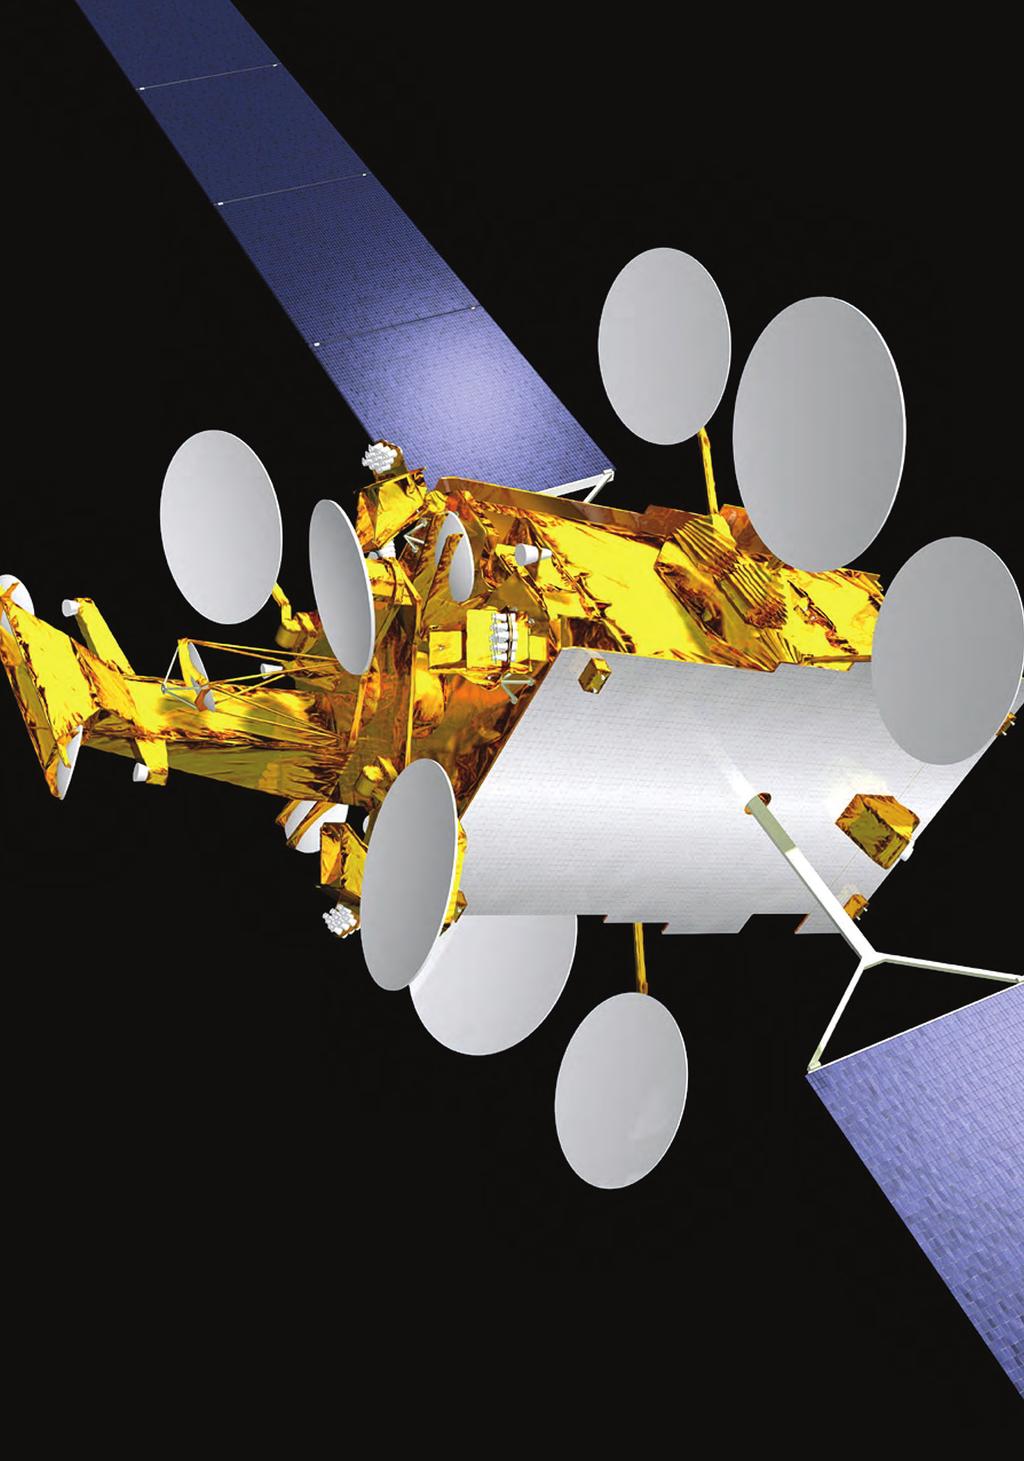 telecommunications Alphasat: a new generation of large